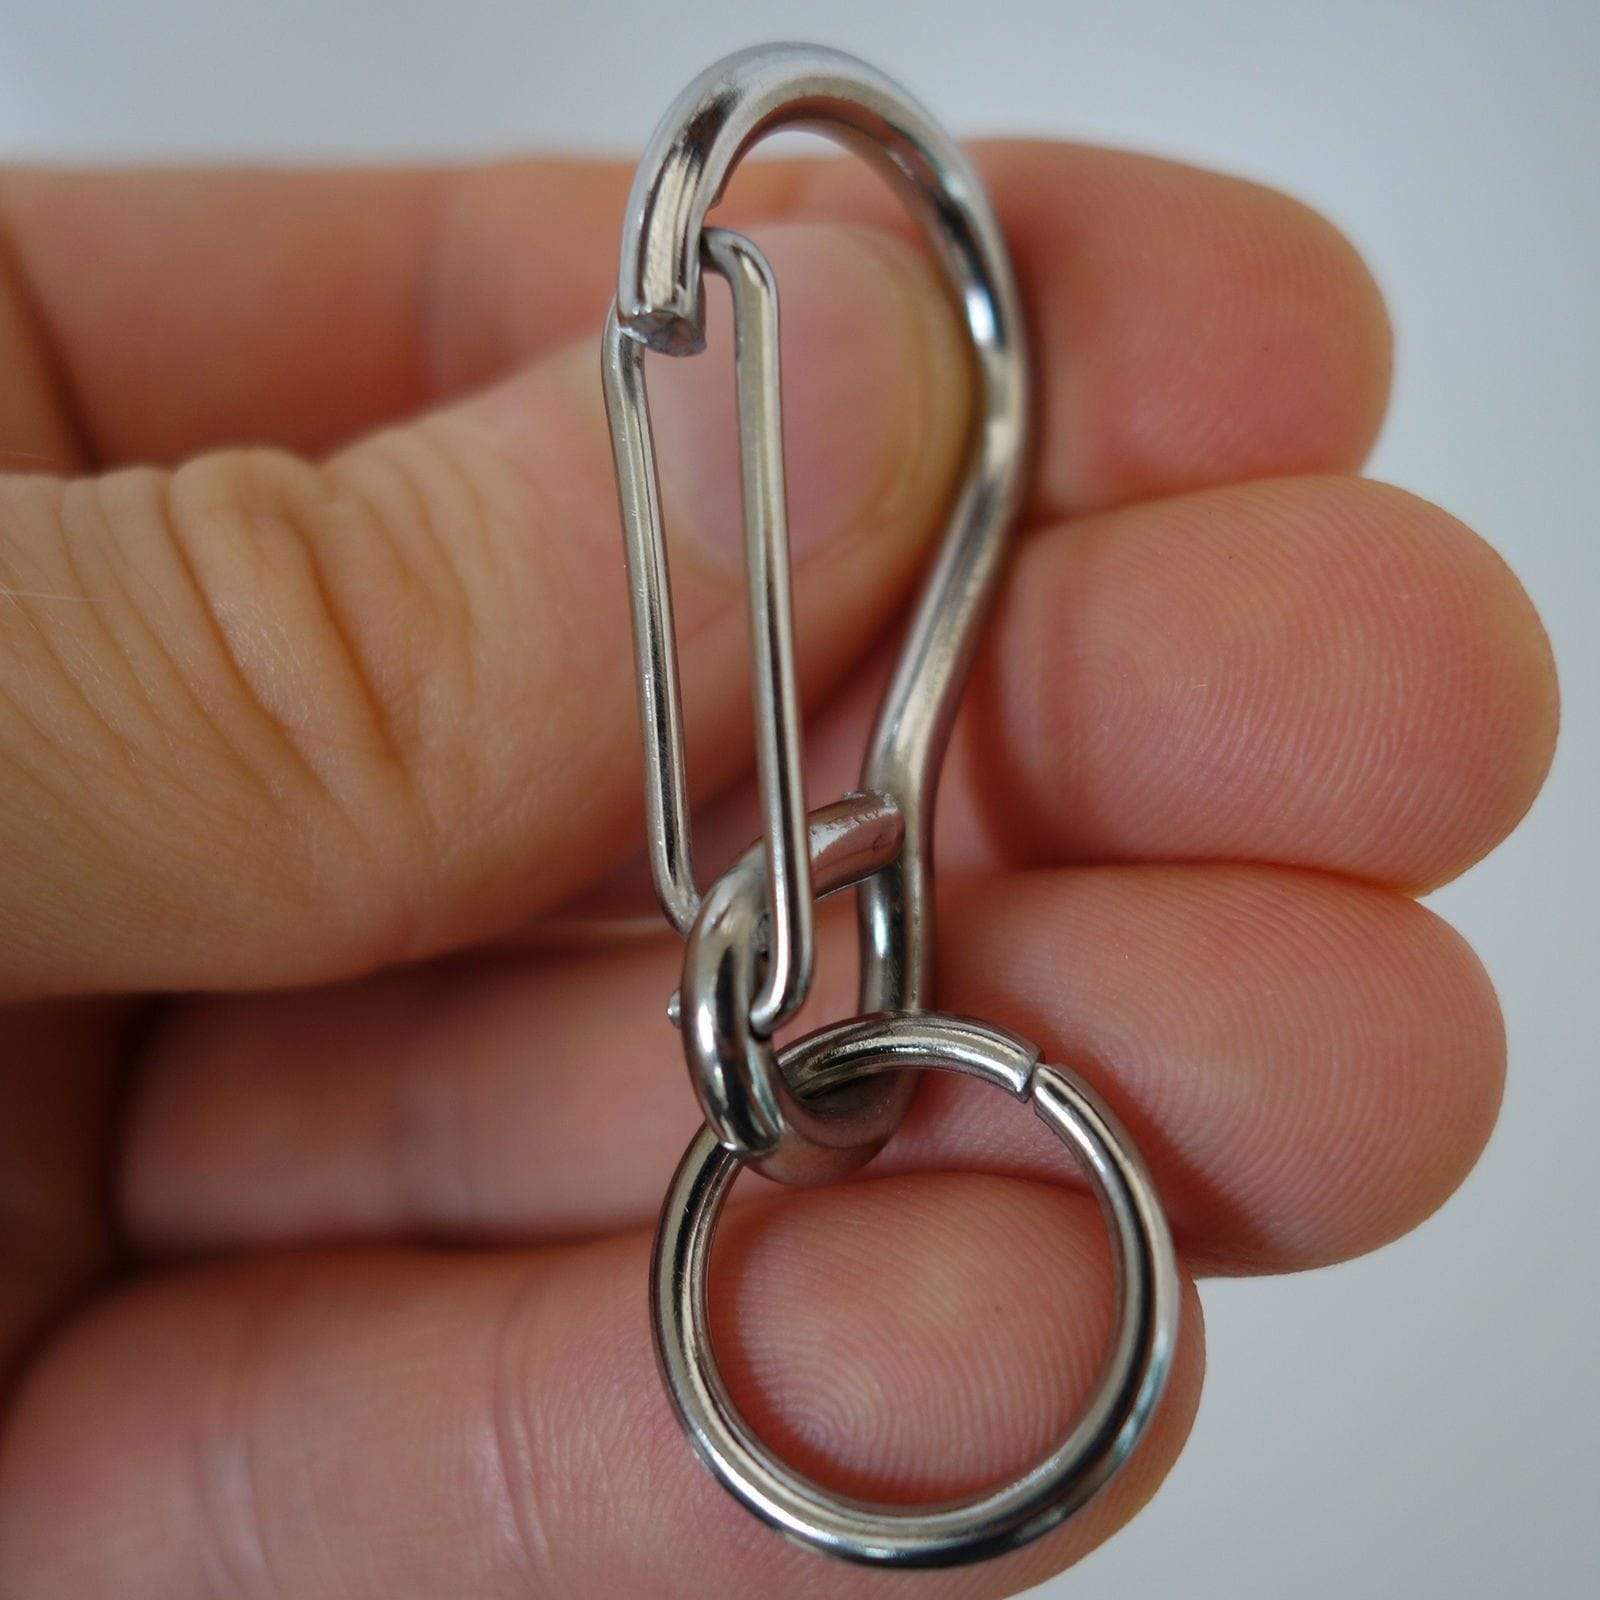 Small Metal Carabiner Key Ring Chain Holder Dog Collar Lead Harness Snap Clip Small Metal Carabiner Key Ring Chain Holder Dog Collar Lead Harness Snap Clip